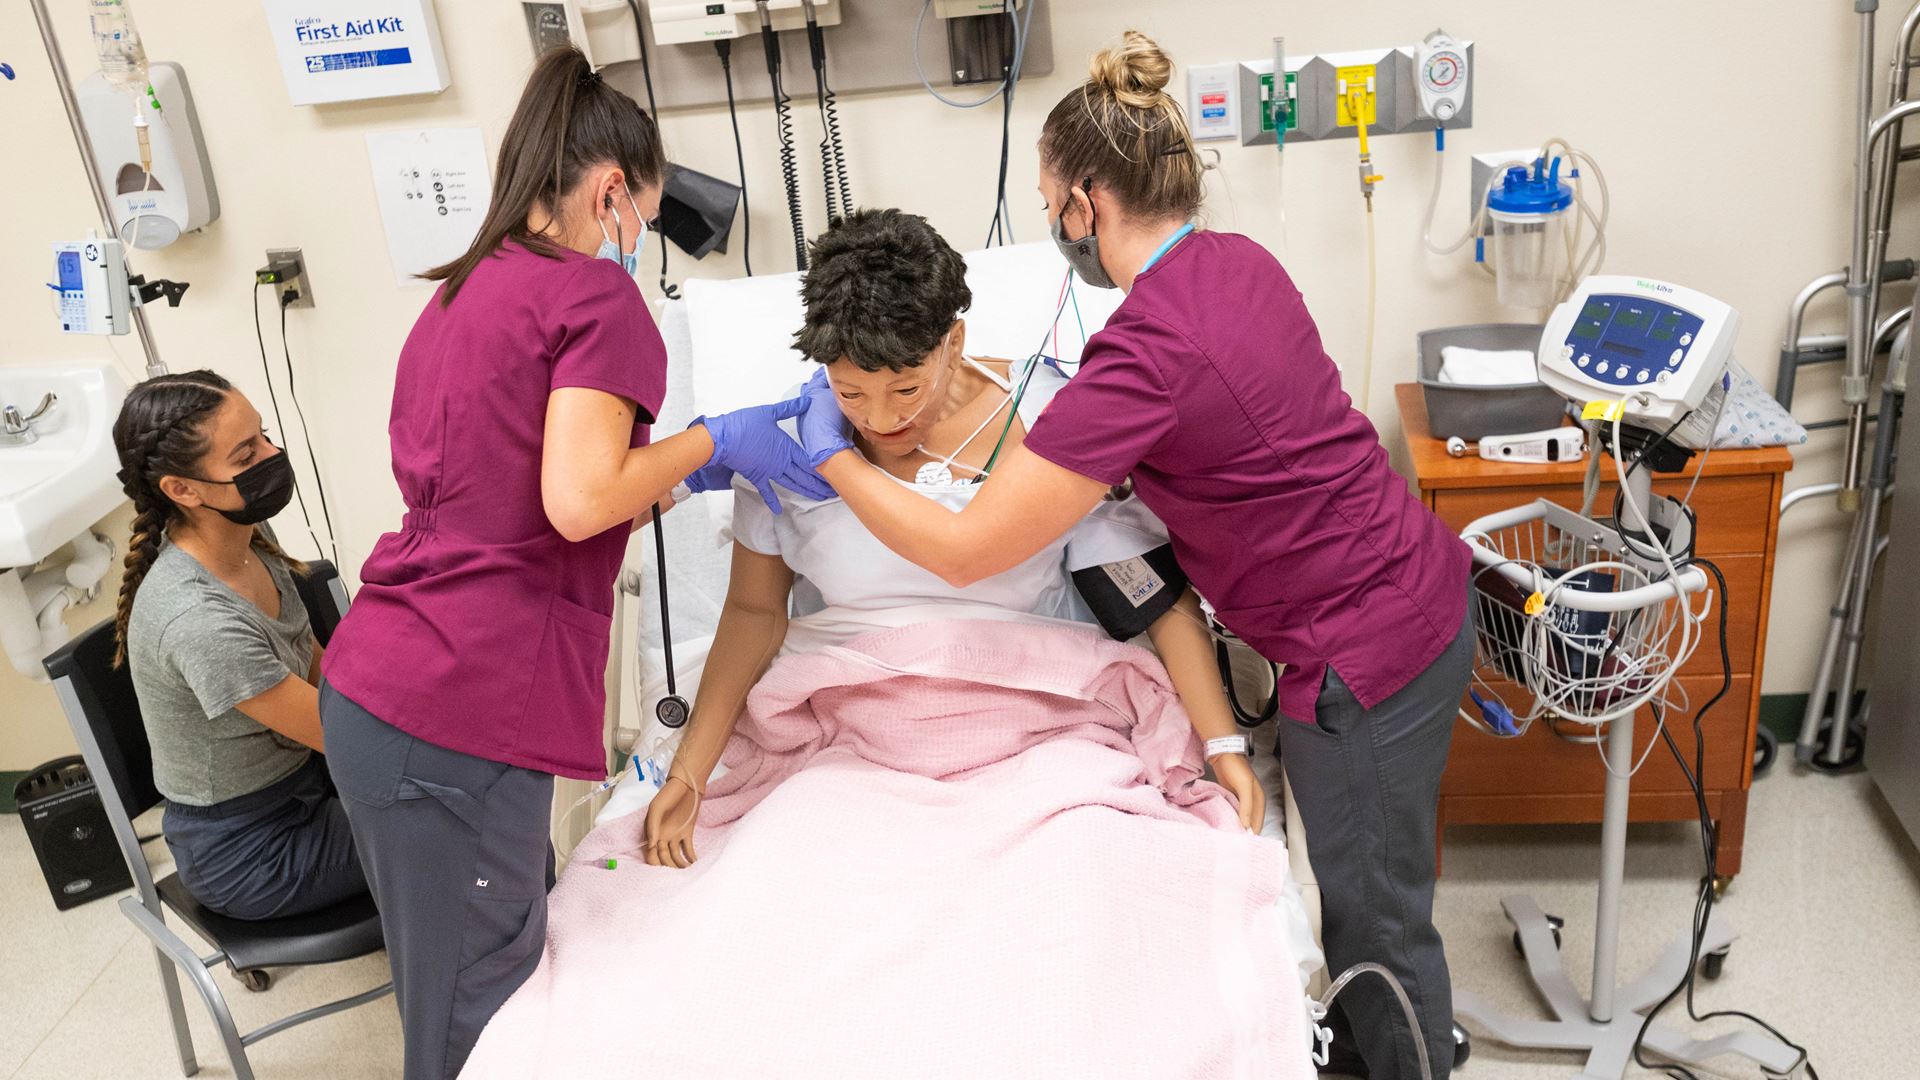 NMSU to create new nursing faculty positions at Las Cruces, DACC campuses